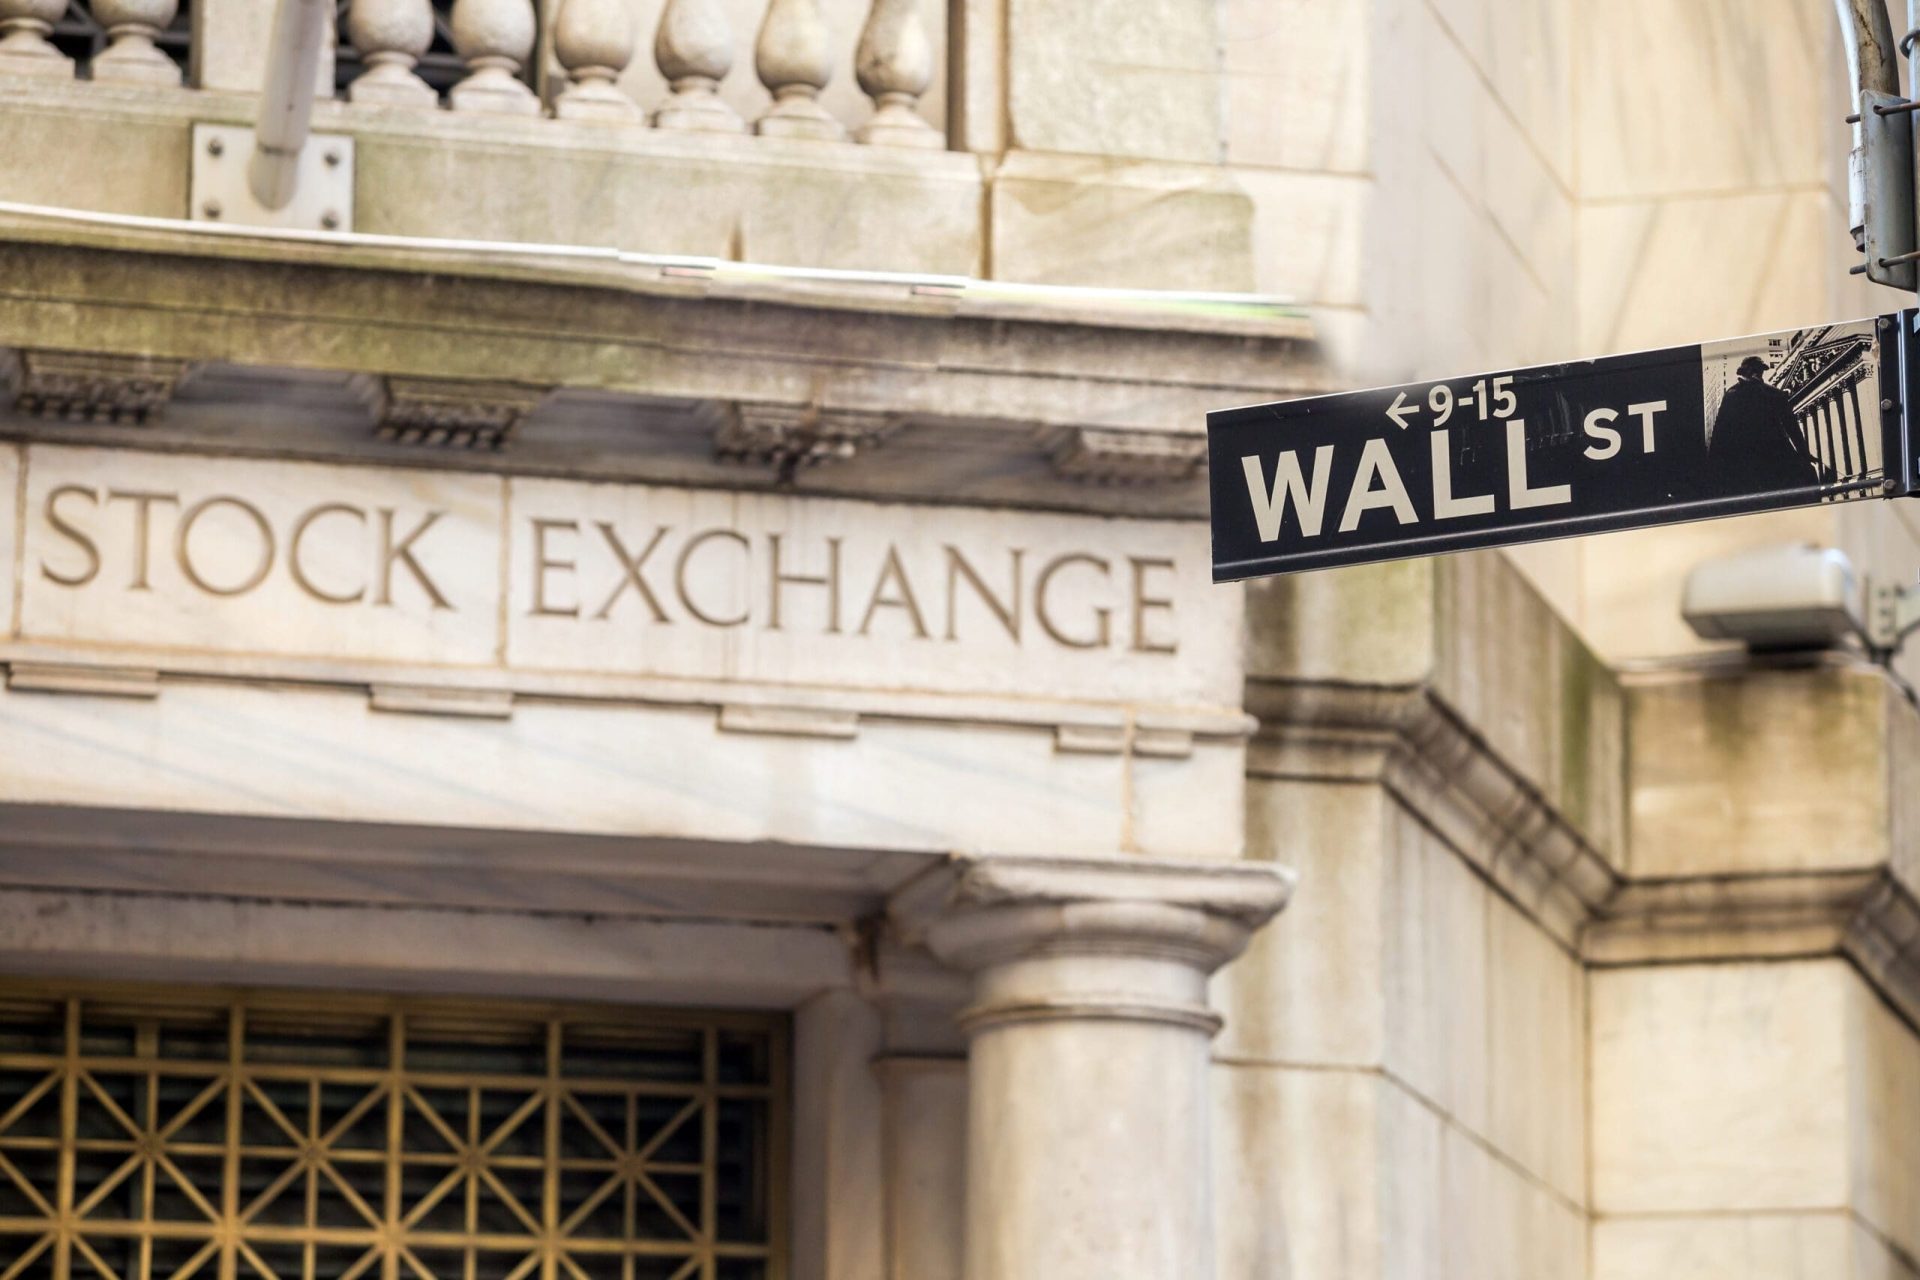 Can you take a tour of Wall Street?